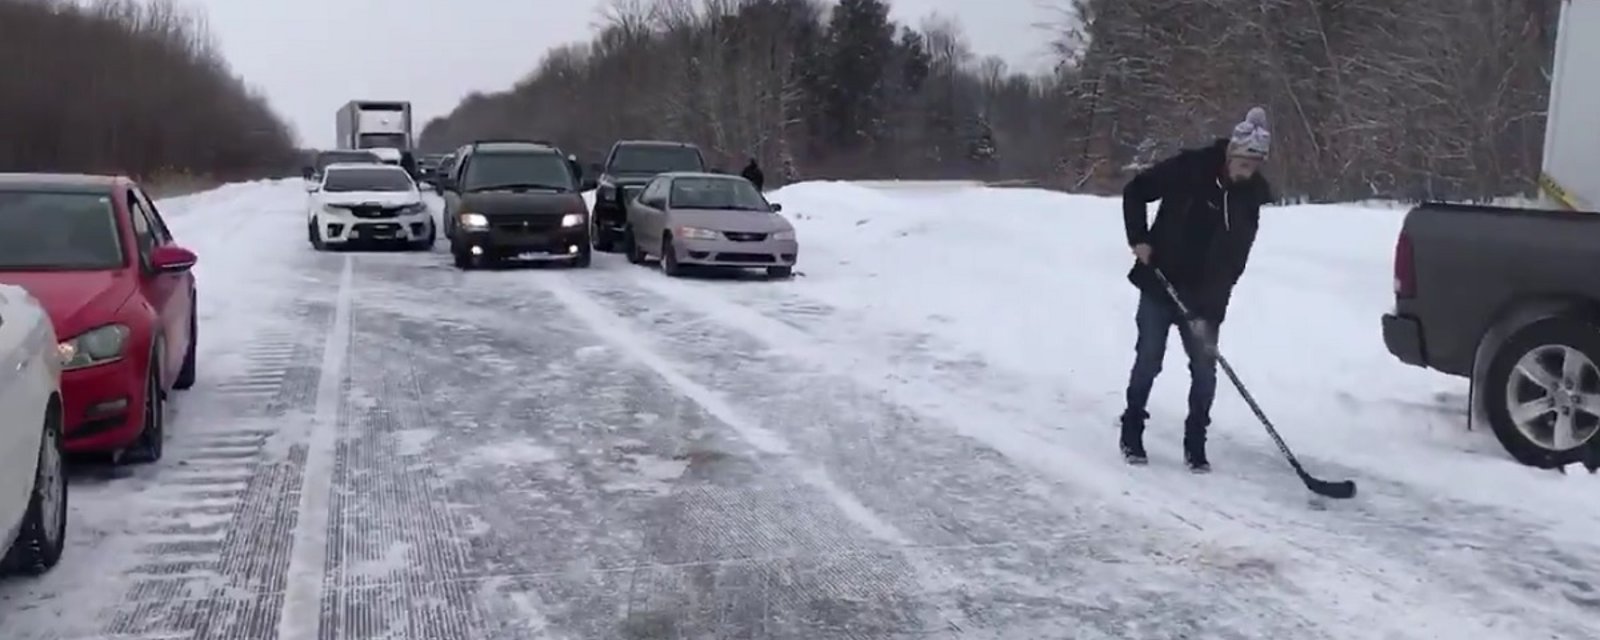 Hockey fans react to major 75 car accident in the most Canadian way ever!